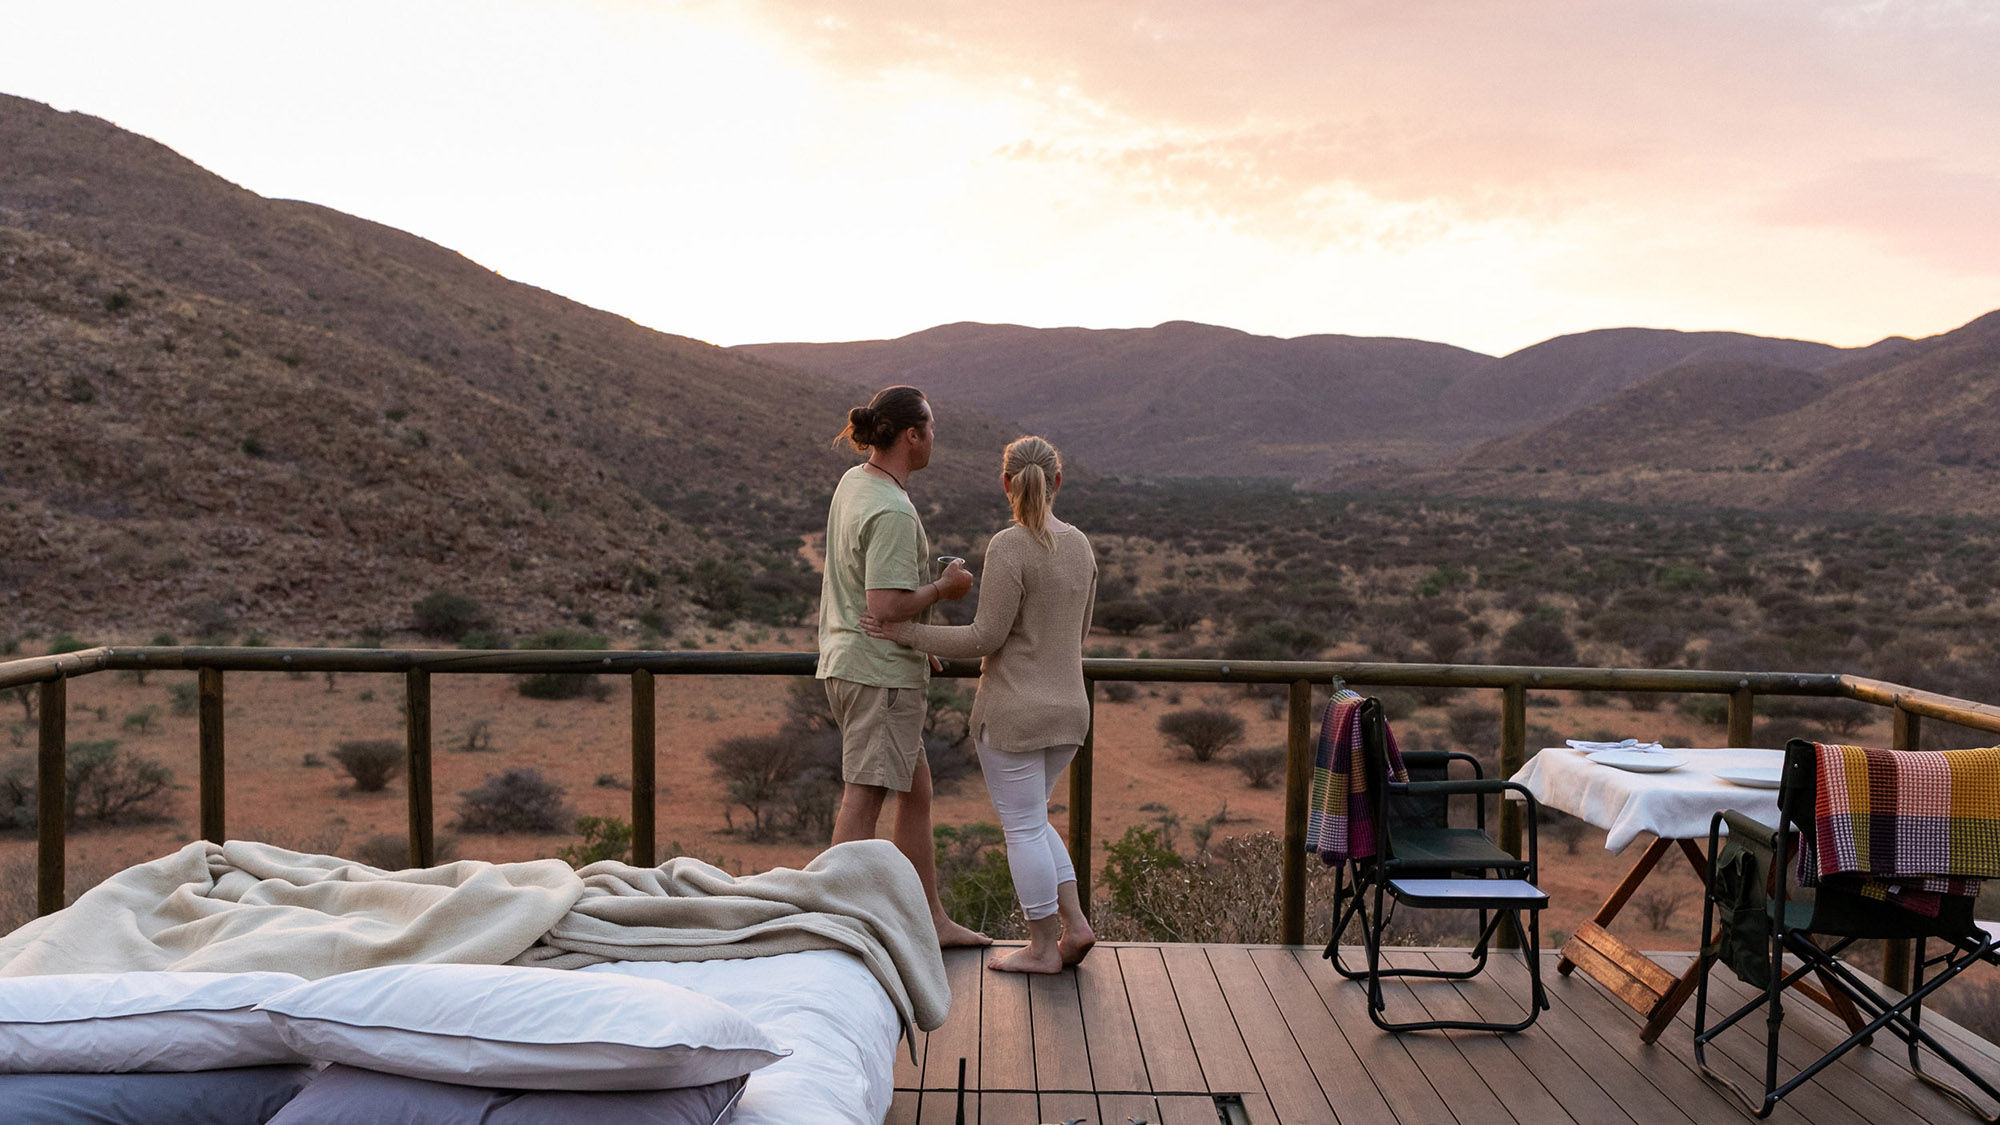 The star bed experience at Tswalu Kalahari's Naledi is designed for two adults but also ideal for a family of four.